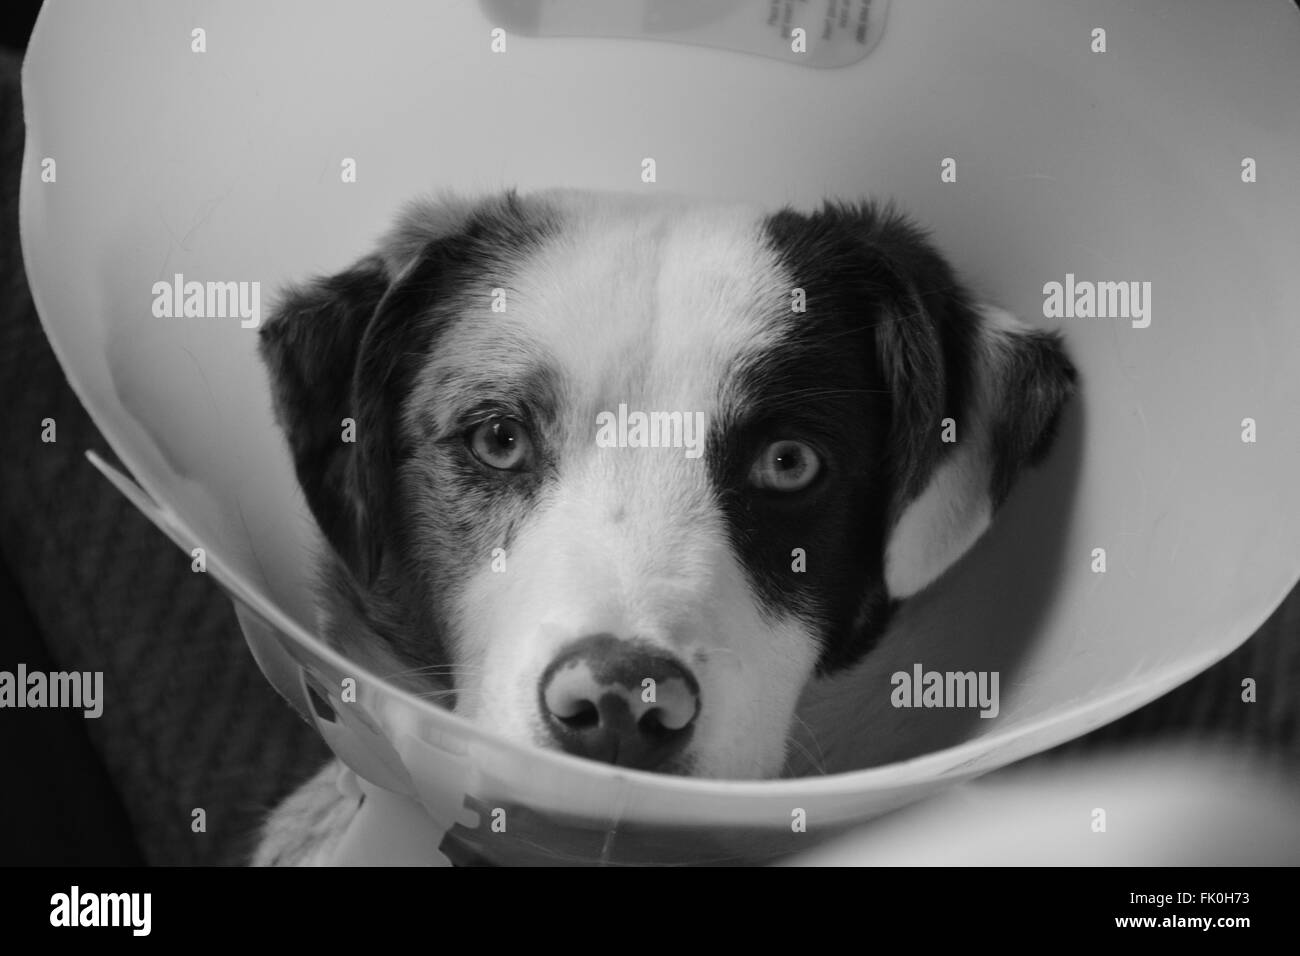 Dog wearing cone looking into camera Stock Photo